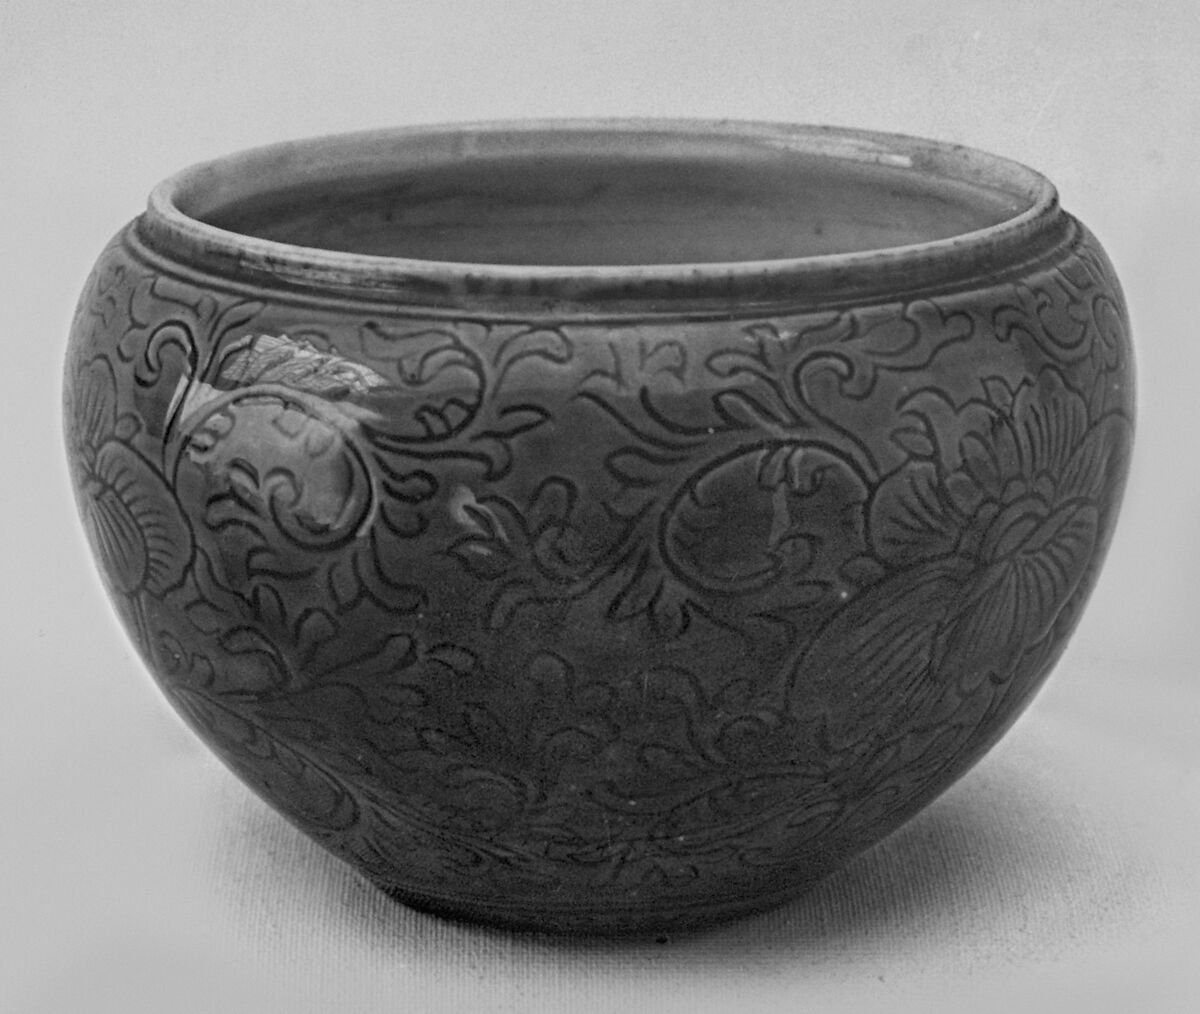 Water pot with flowers, Porcelain with incised design under green glaze (Jingdezhen ware), China 